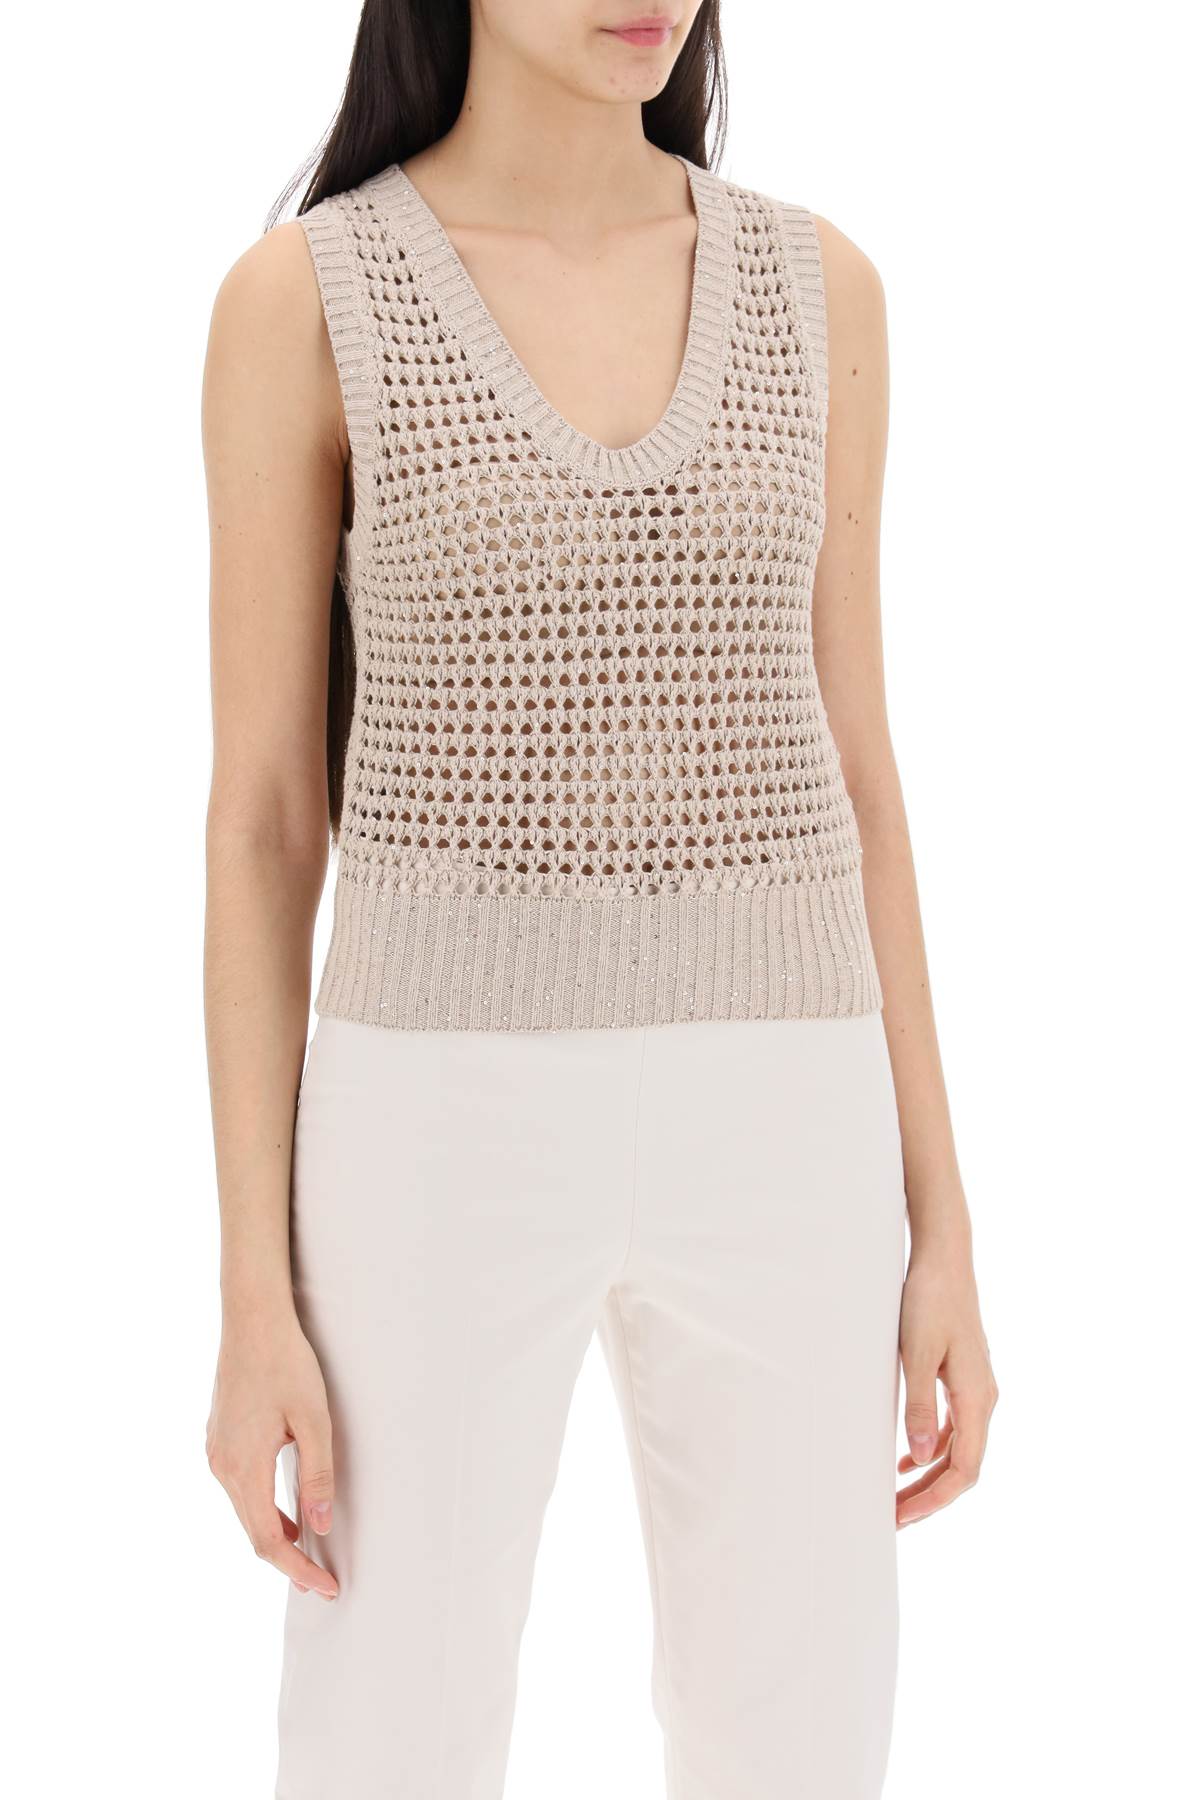 Brunello cucinelli knit top with sparkling details-1